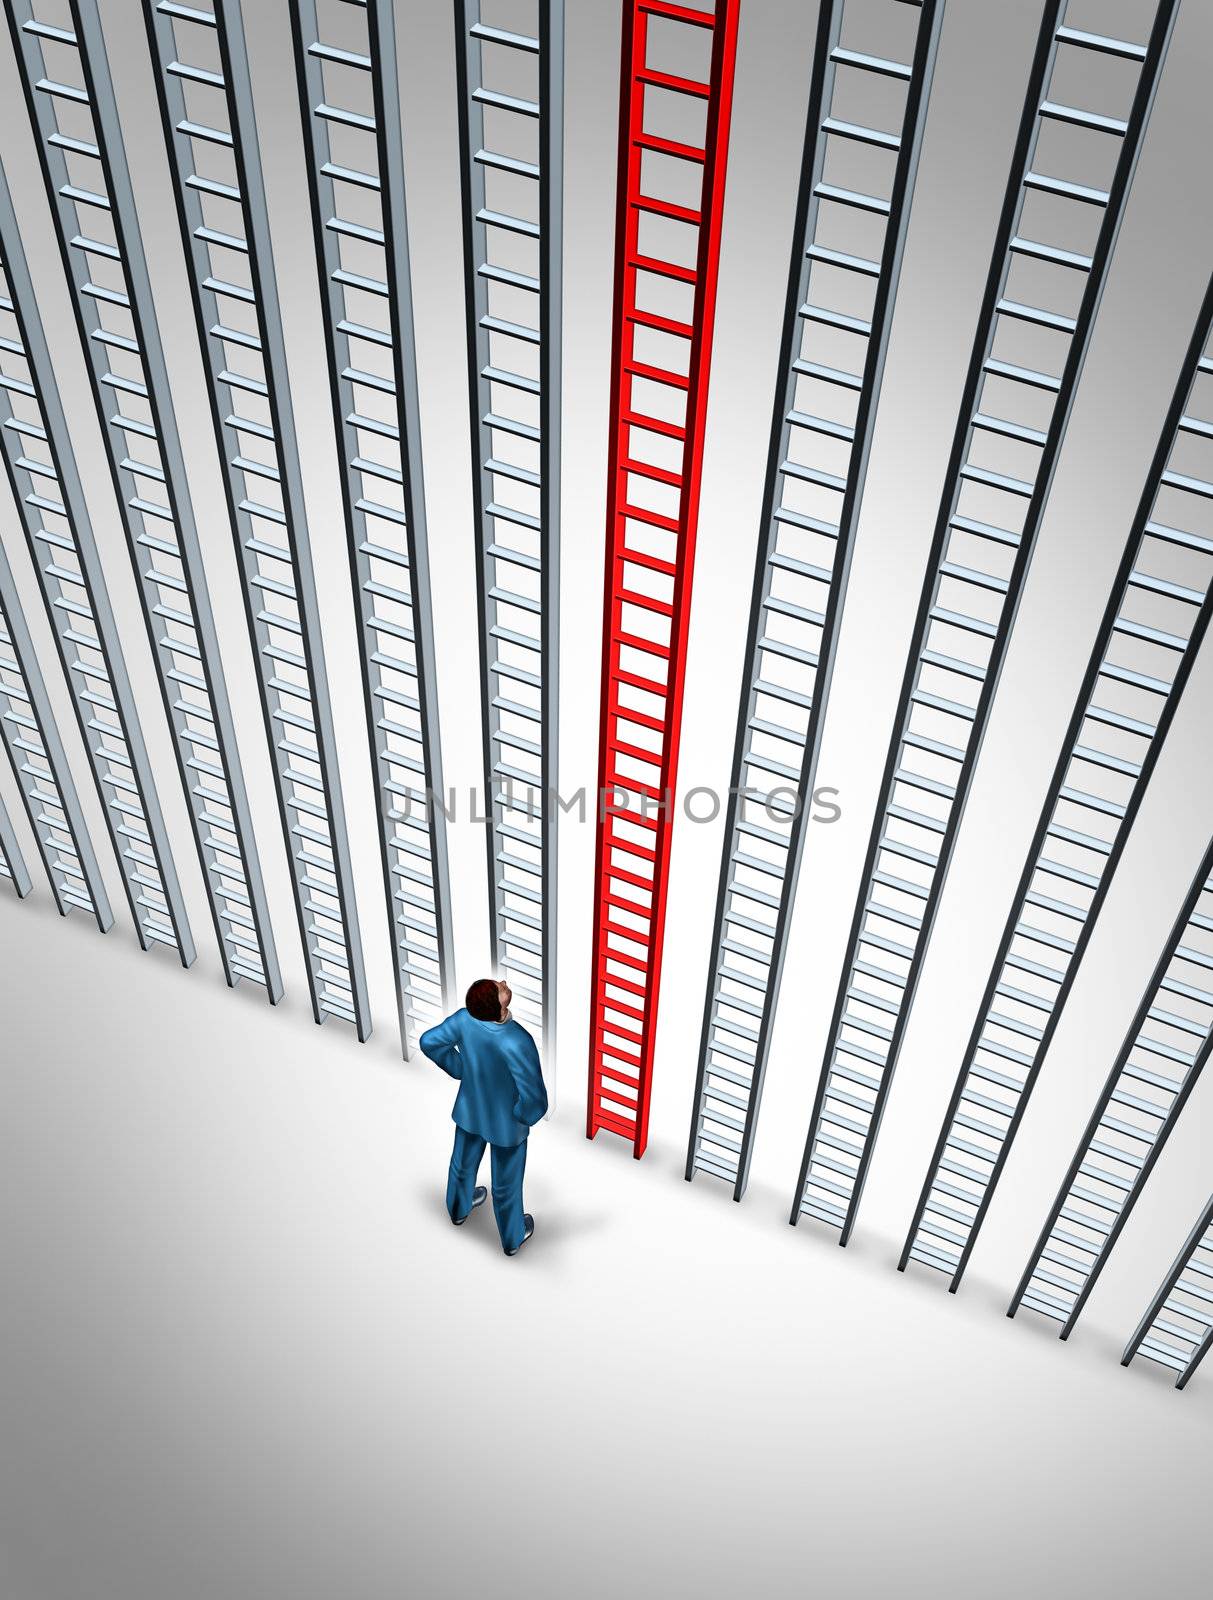 Business success choice with a career person tanding in front of a group of ladders with the red one as the best choice for financial wealth on a white background.